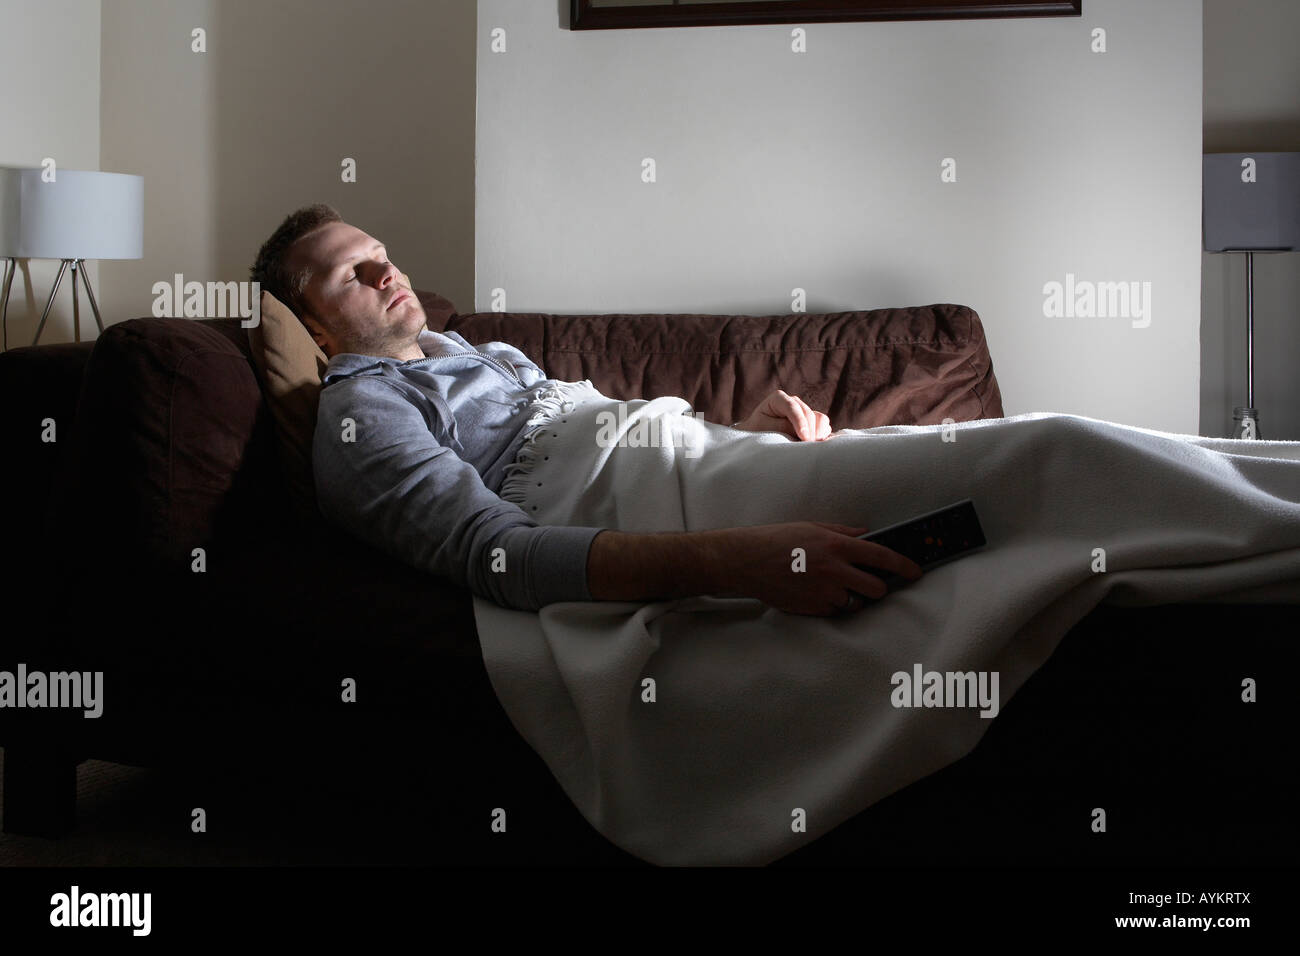 Man asleep on couch Stock Photo